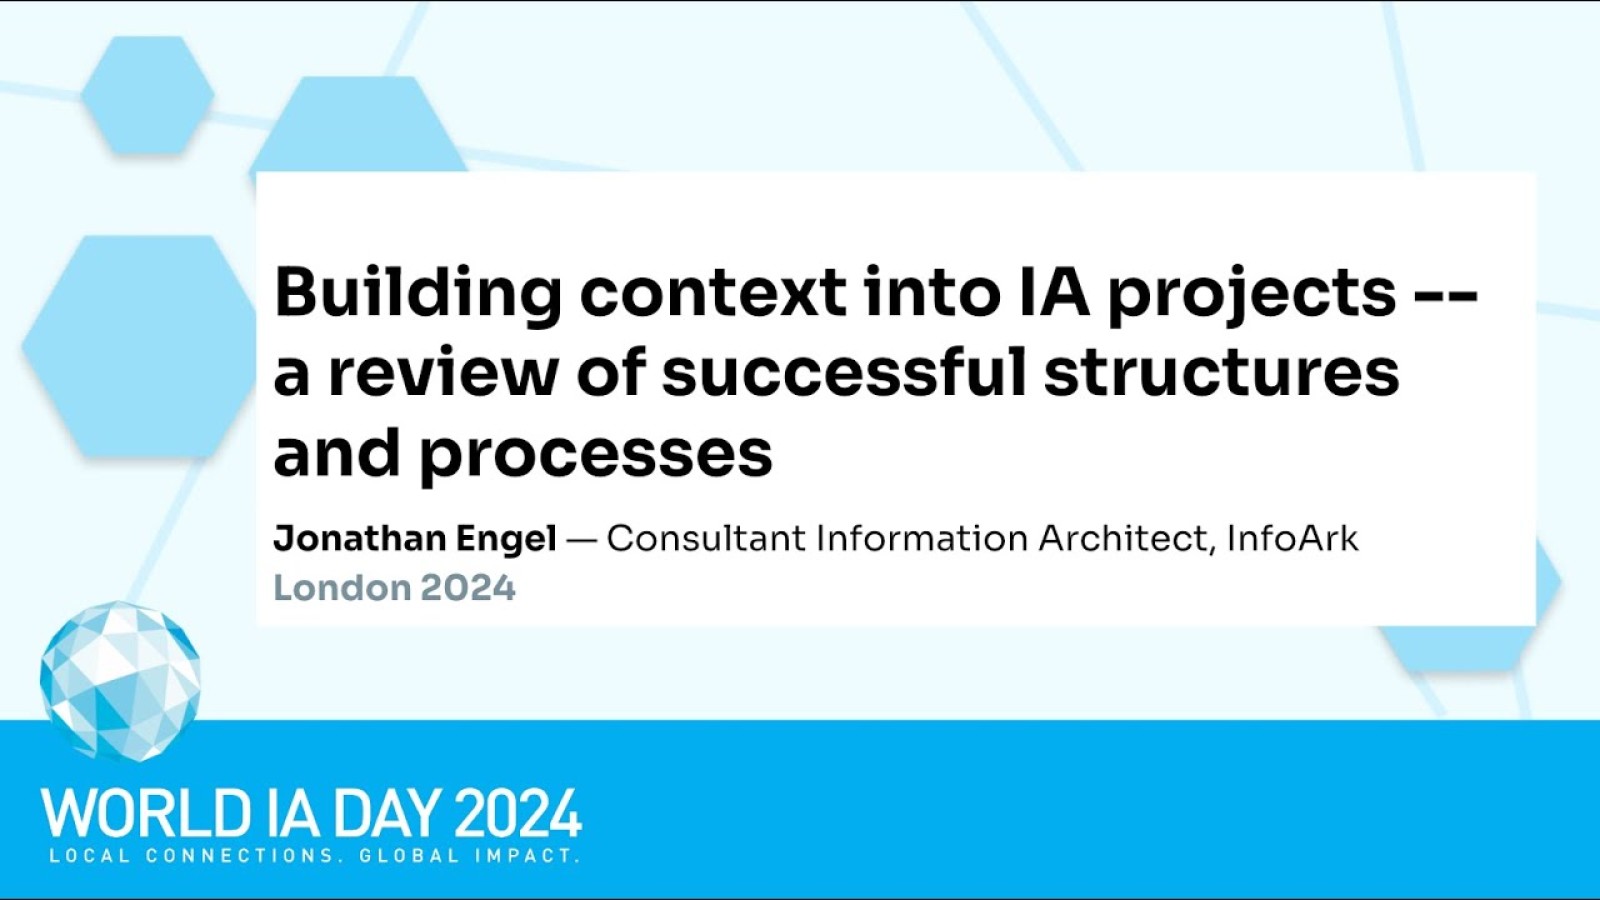 Building context into IA projects with Jonathan Engel